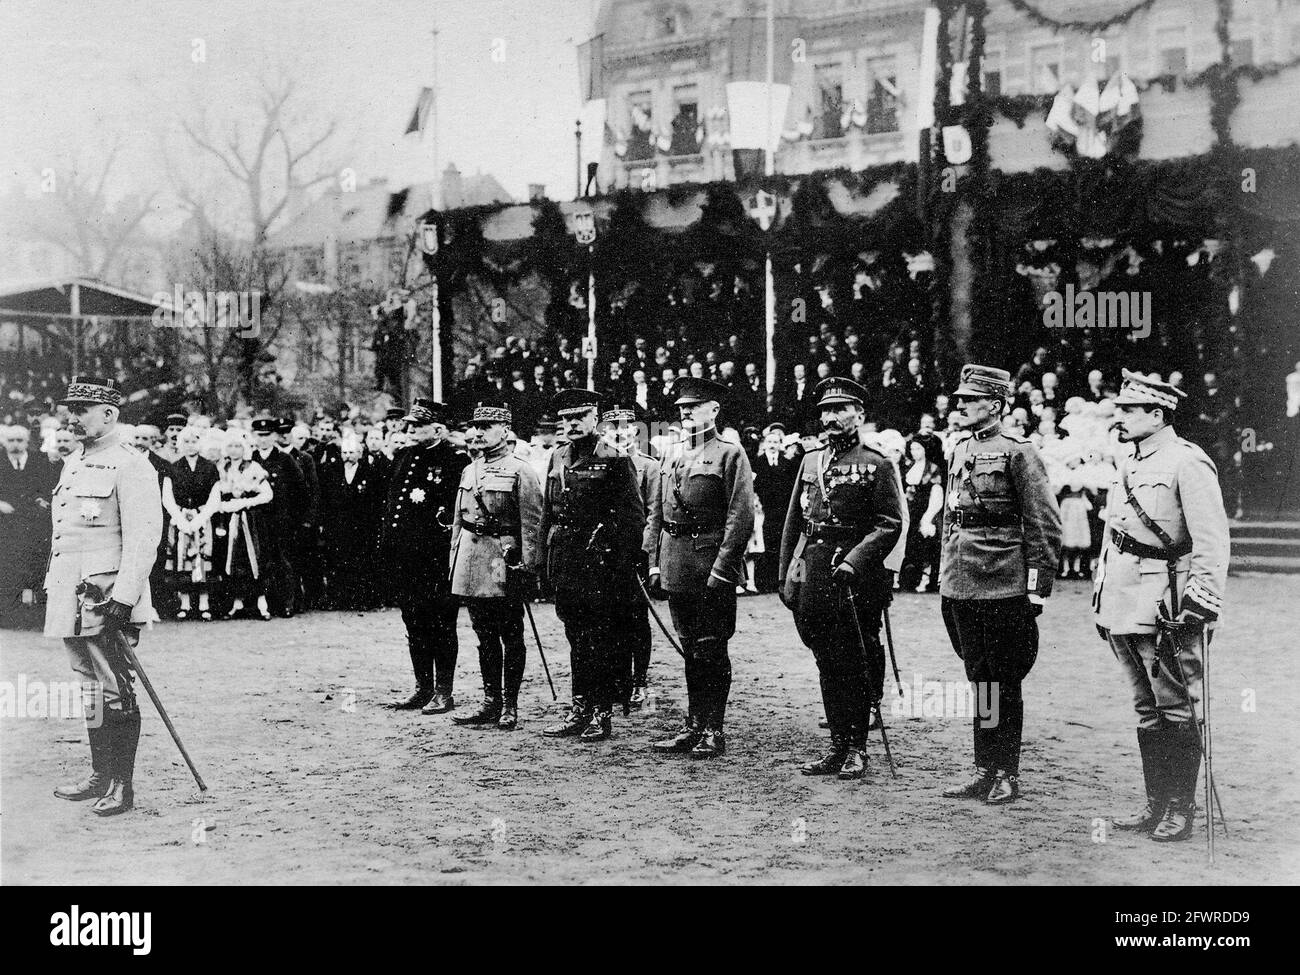 A ceremony at Metz on 8 December 1918 when the Baton of Marshal was presented to General Philippe Pétain of the French Army. Aligned behind him are (left to right): Marshall Joffre; Marshal Foch; Field Marshal Sir Douglas Haig; General John J. Pershing; General Gillain; General Albricci and General Haller. Stock Photo